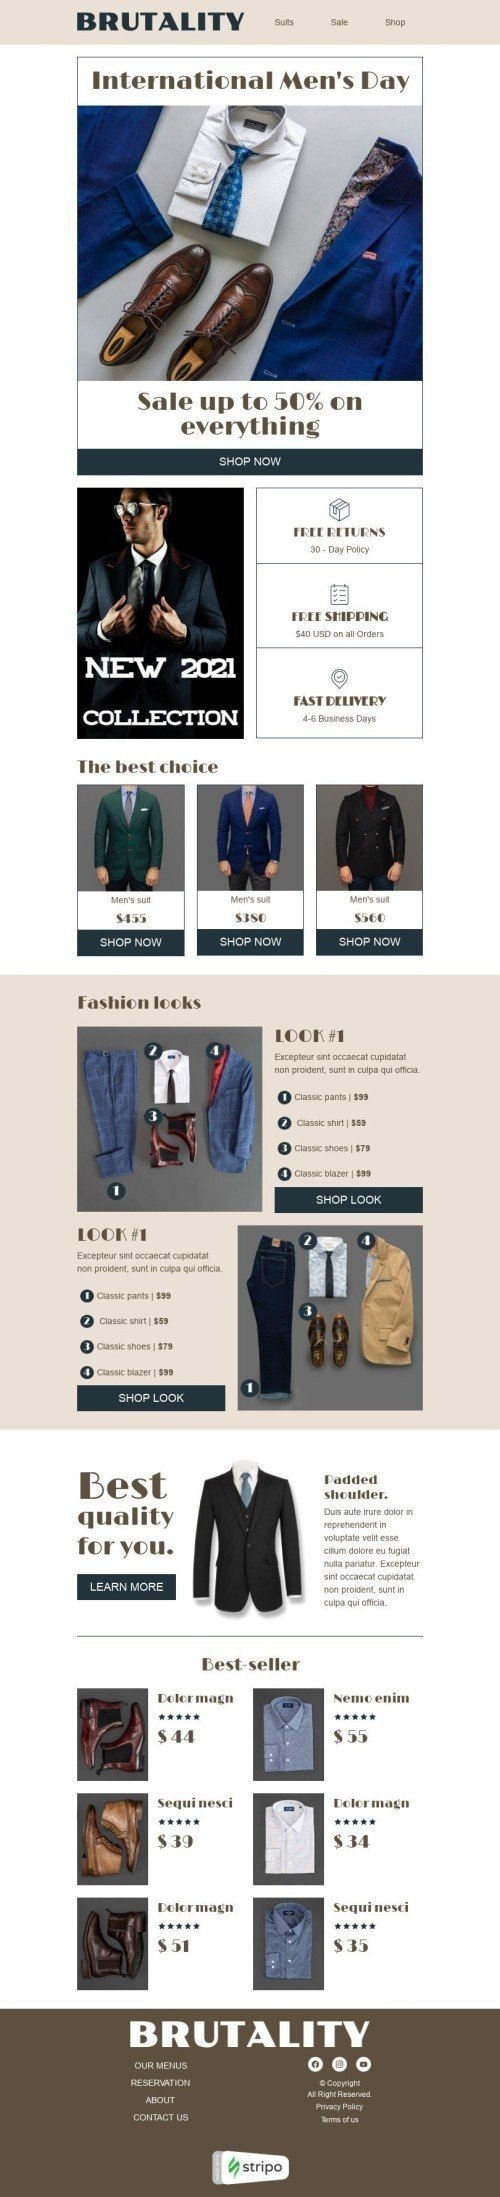 International Men's Day Email Template «Men's suits» for Fashion industry mobile view